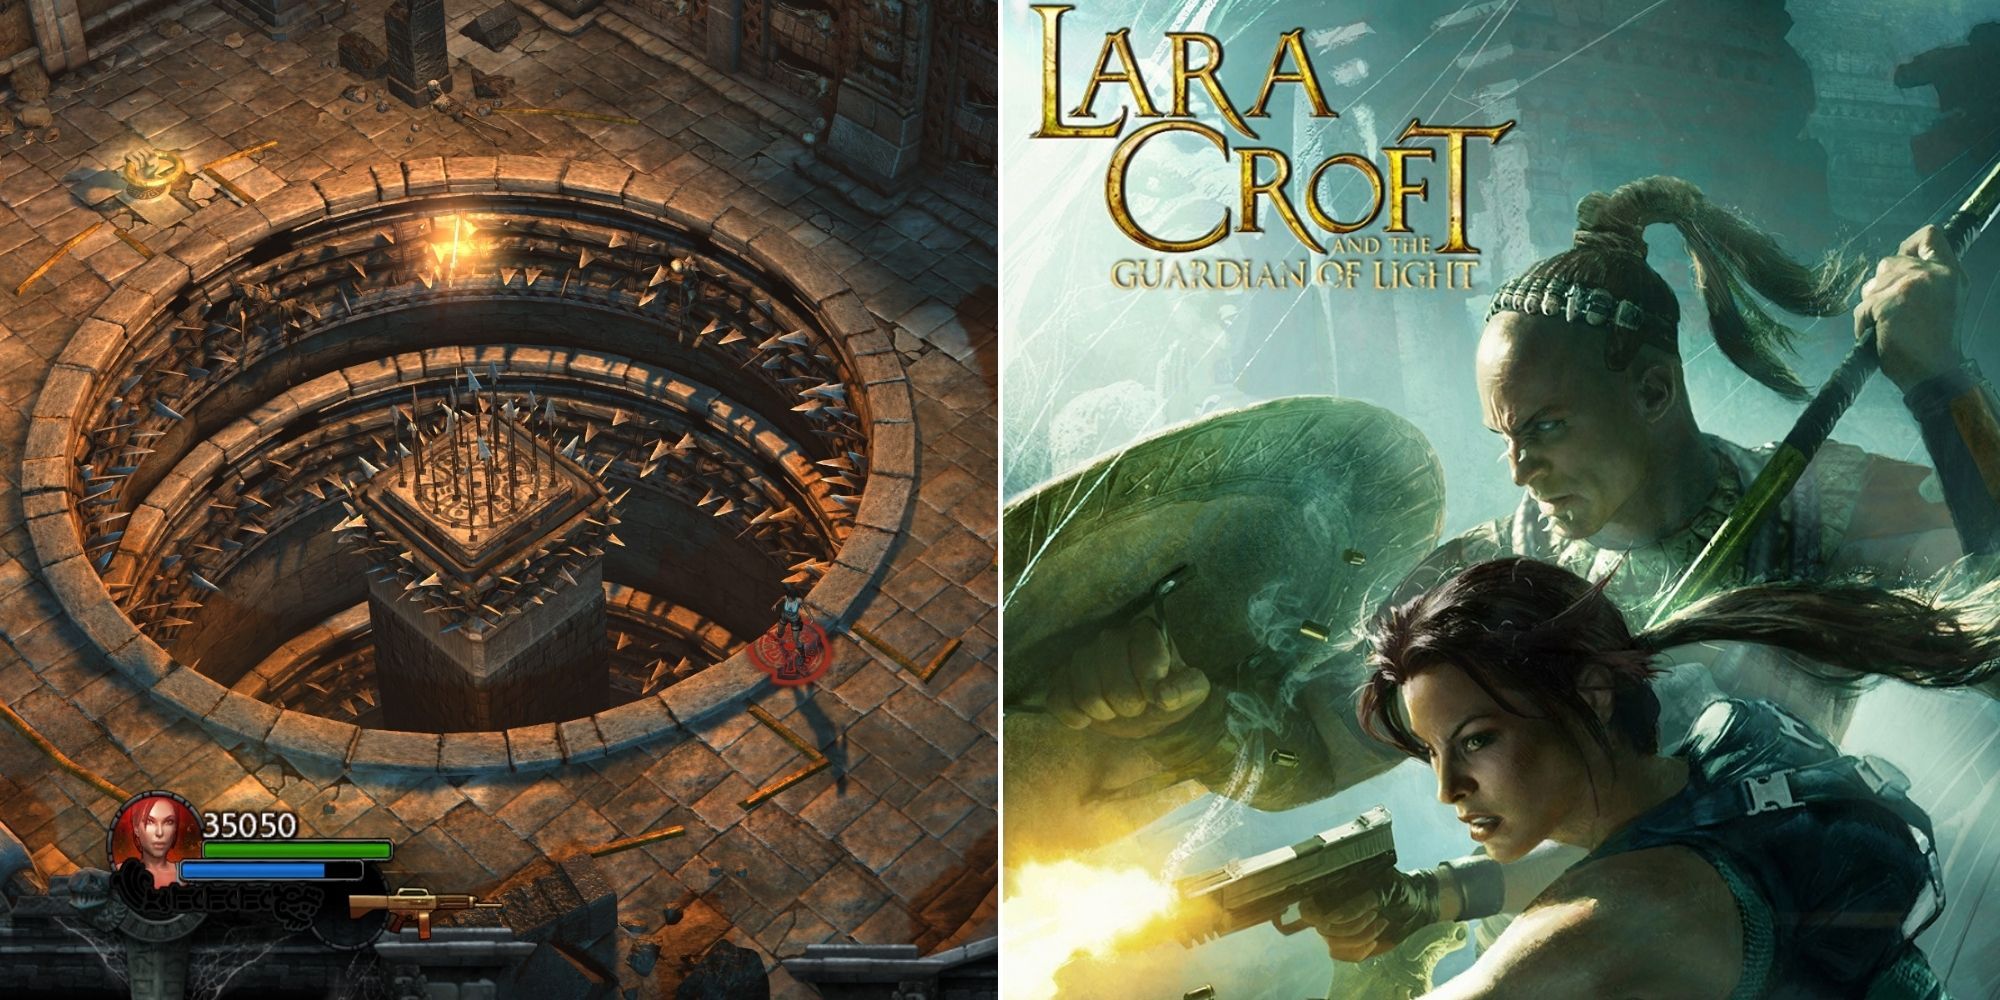 Lara Croft And The Guardian Of Light: Lara Croft standing before a spiked pit And The Cover Art With Lara Croft and Totec In Battle